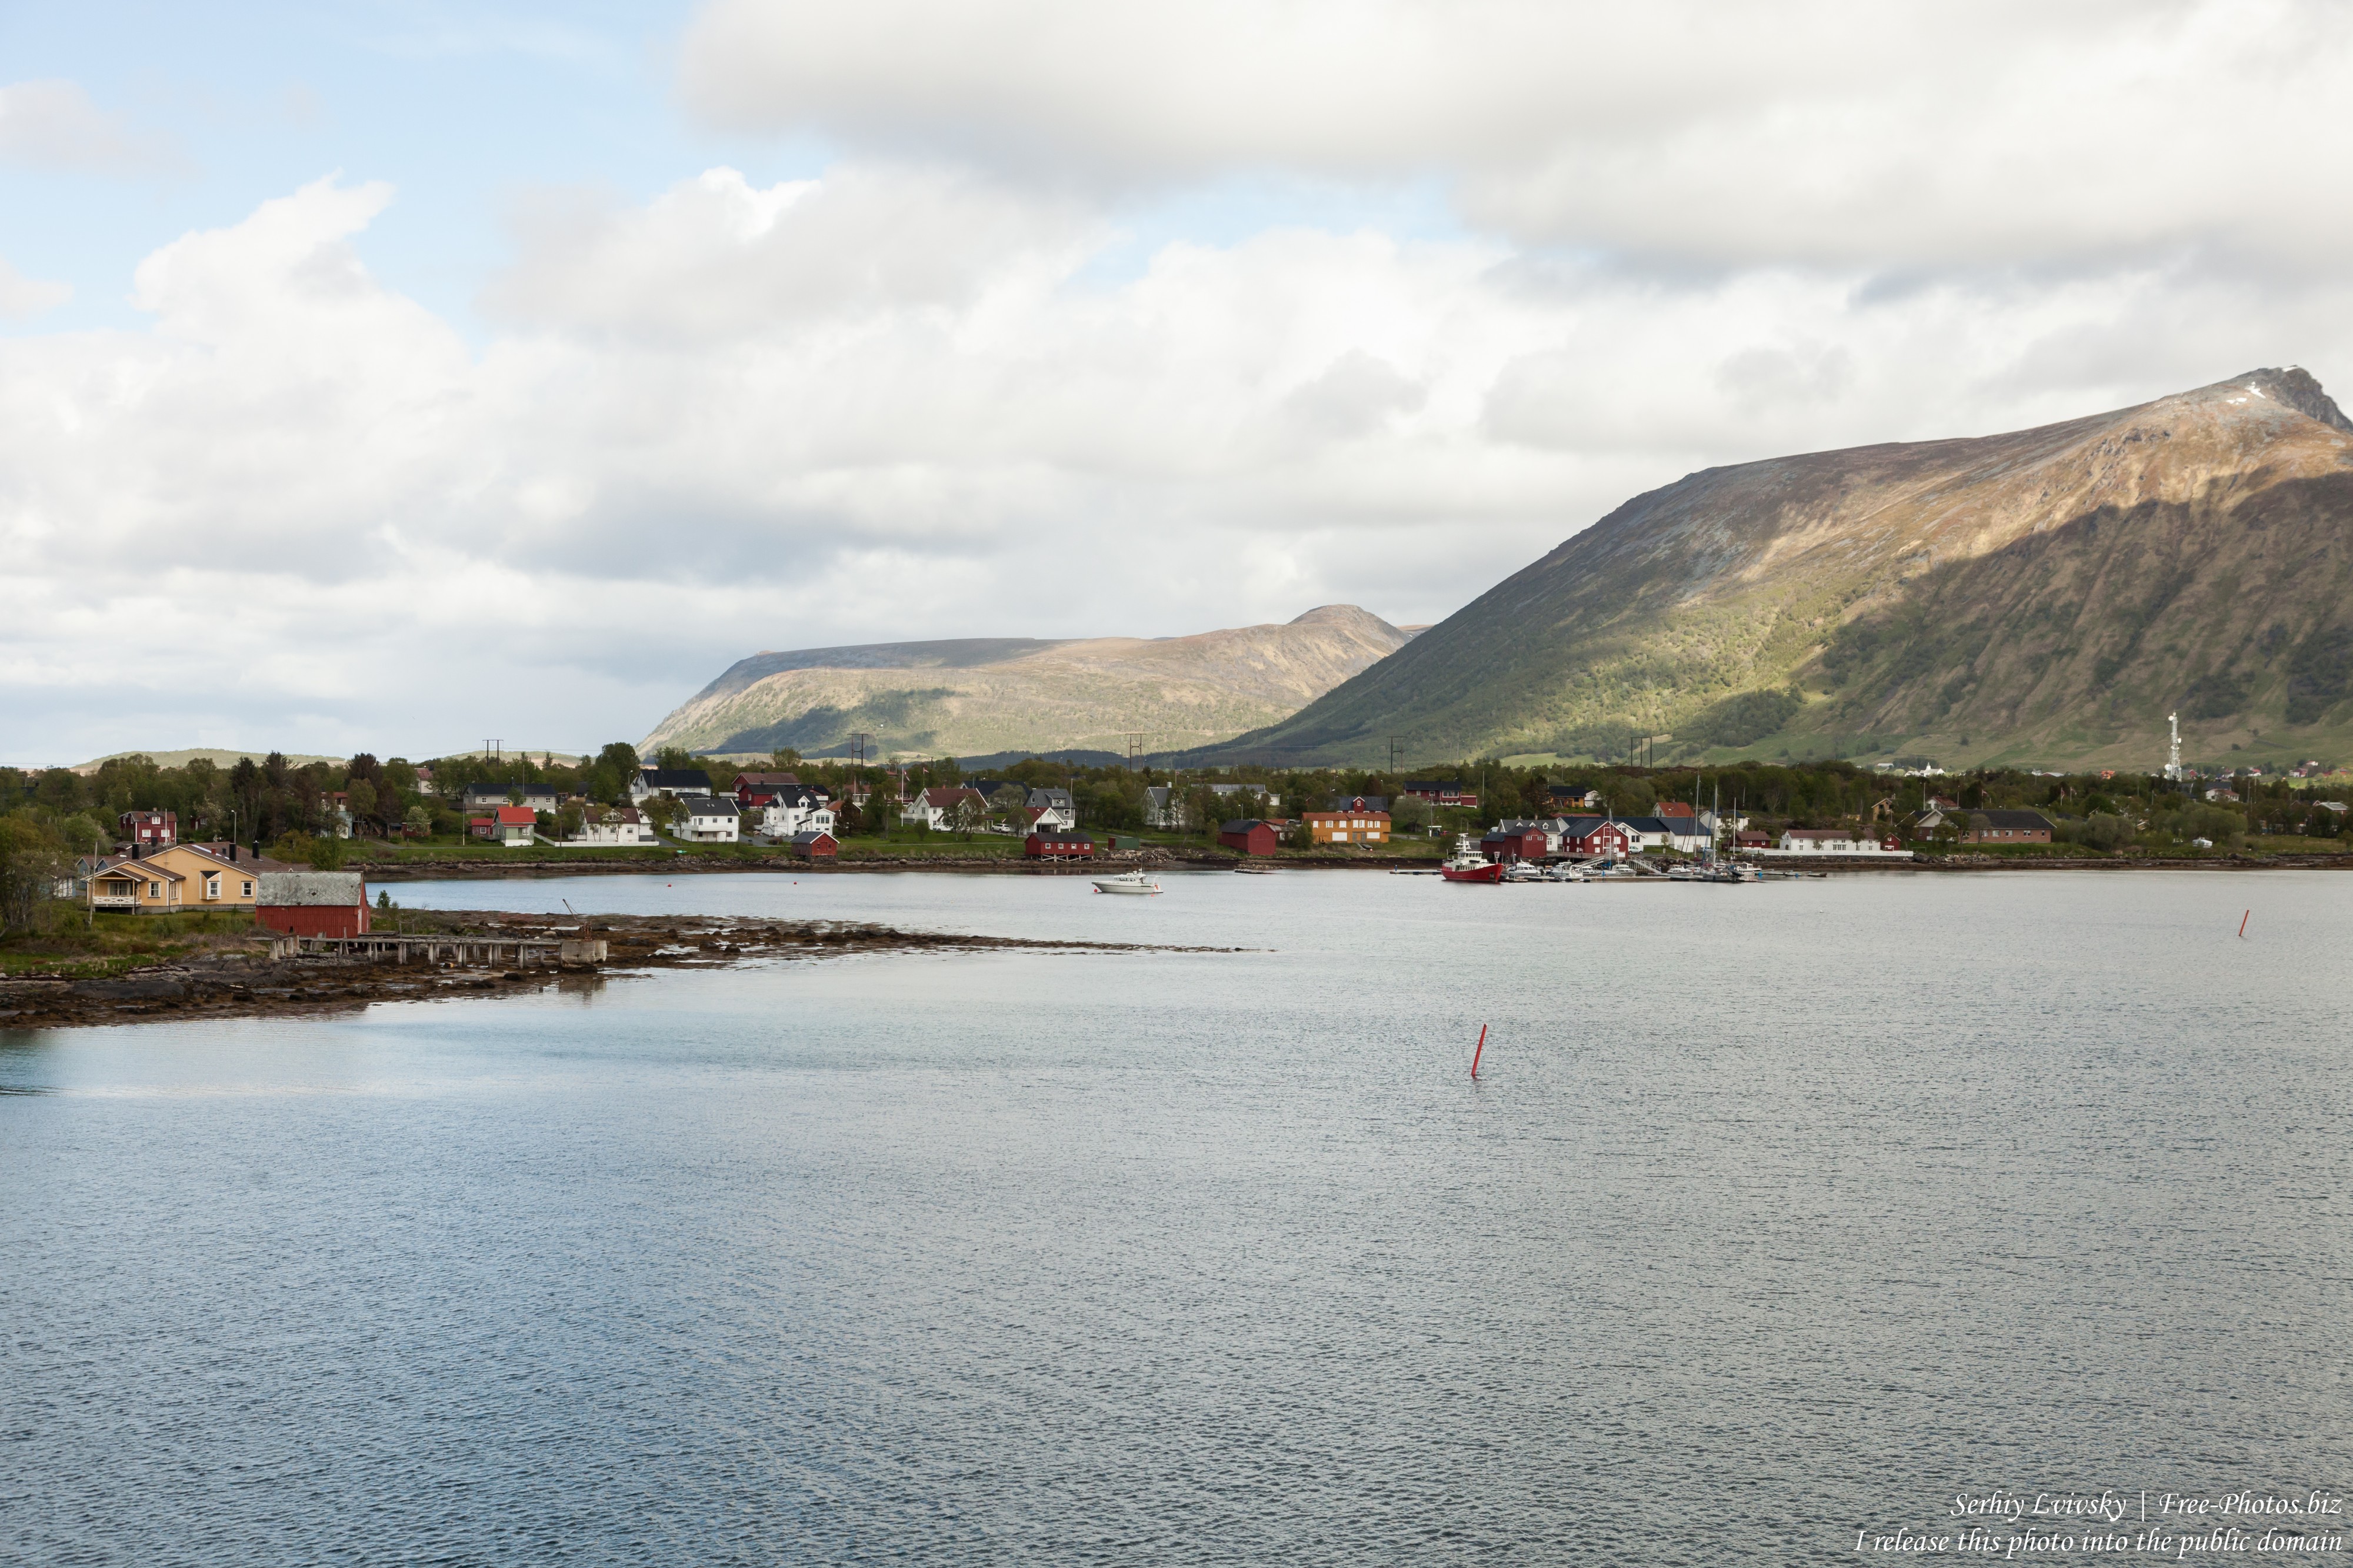 way from Tromso to Risoyhamn, Norway, photographed in June 2018 by Serhiy Lvivsky, picture 4